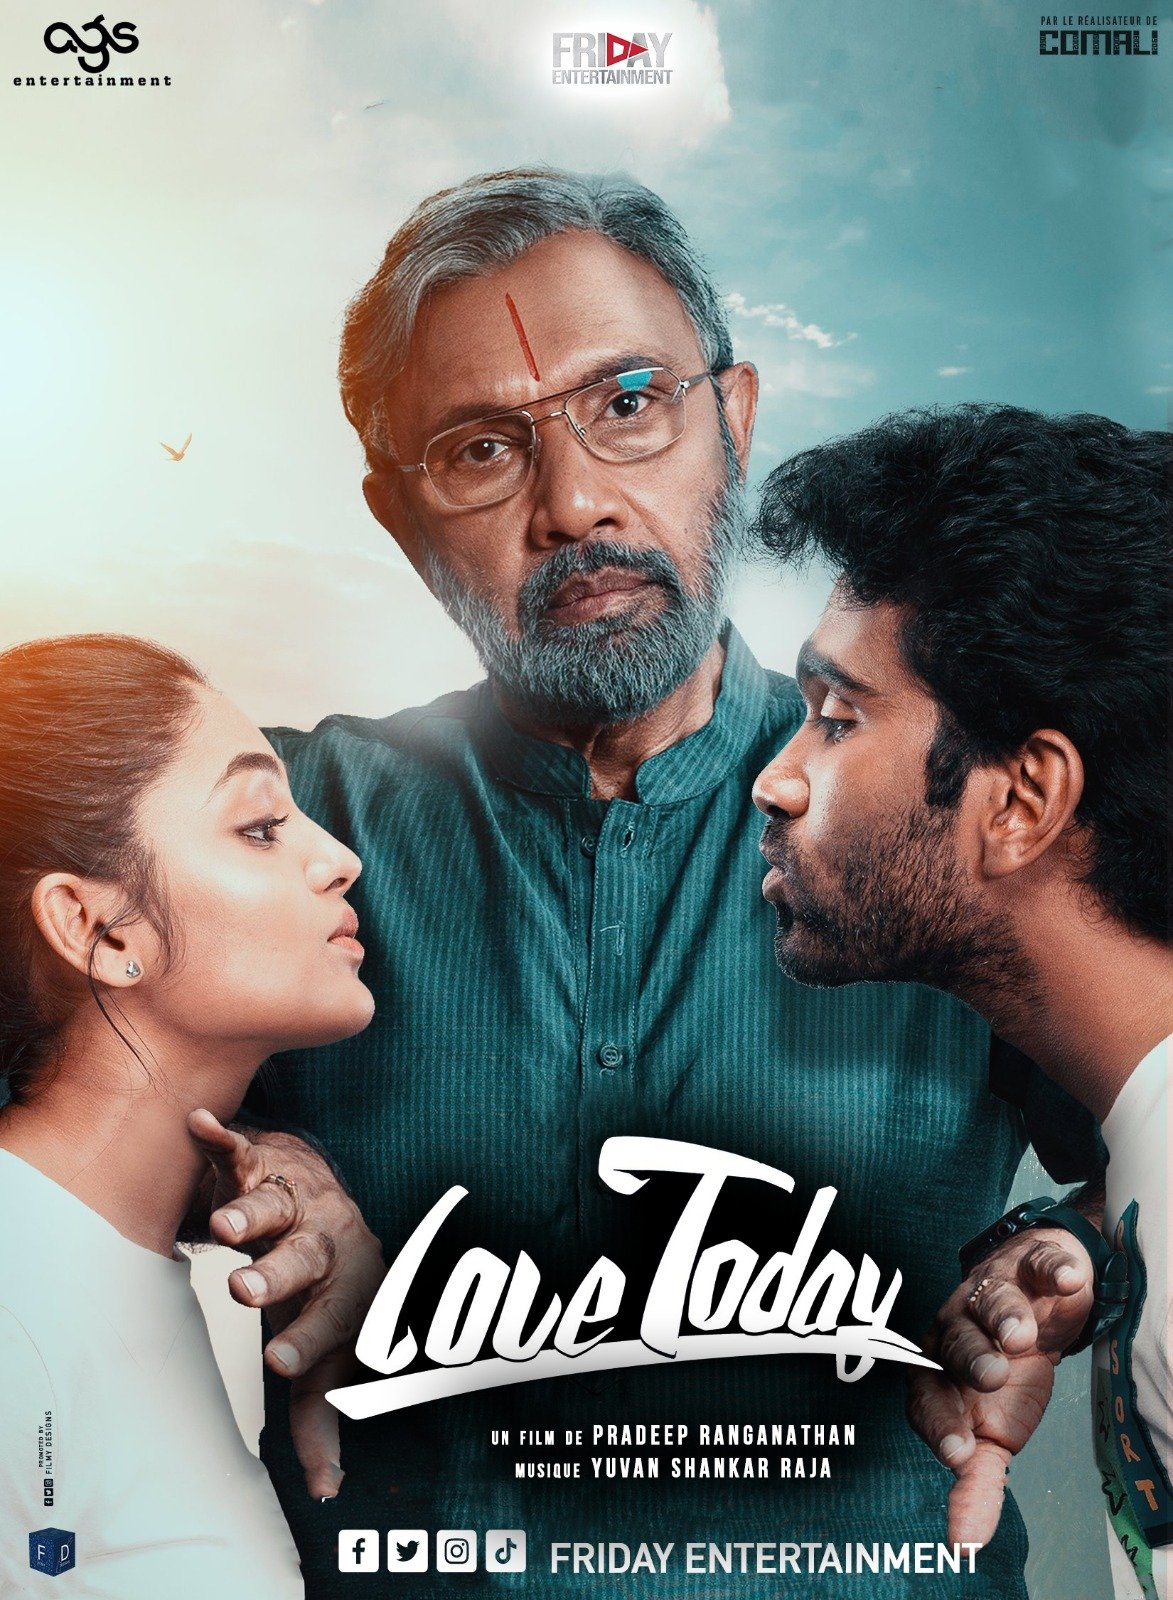 love today movie review in behindwoods